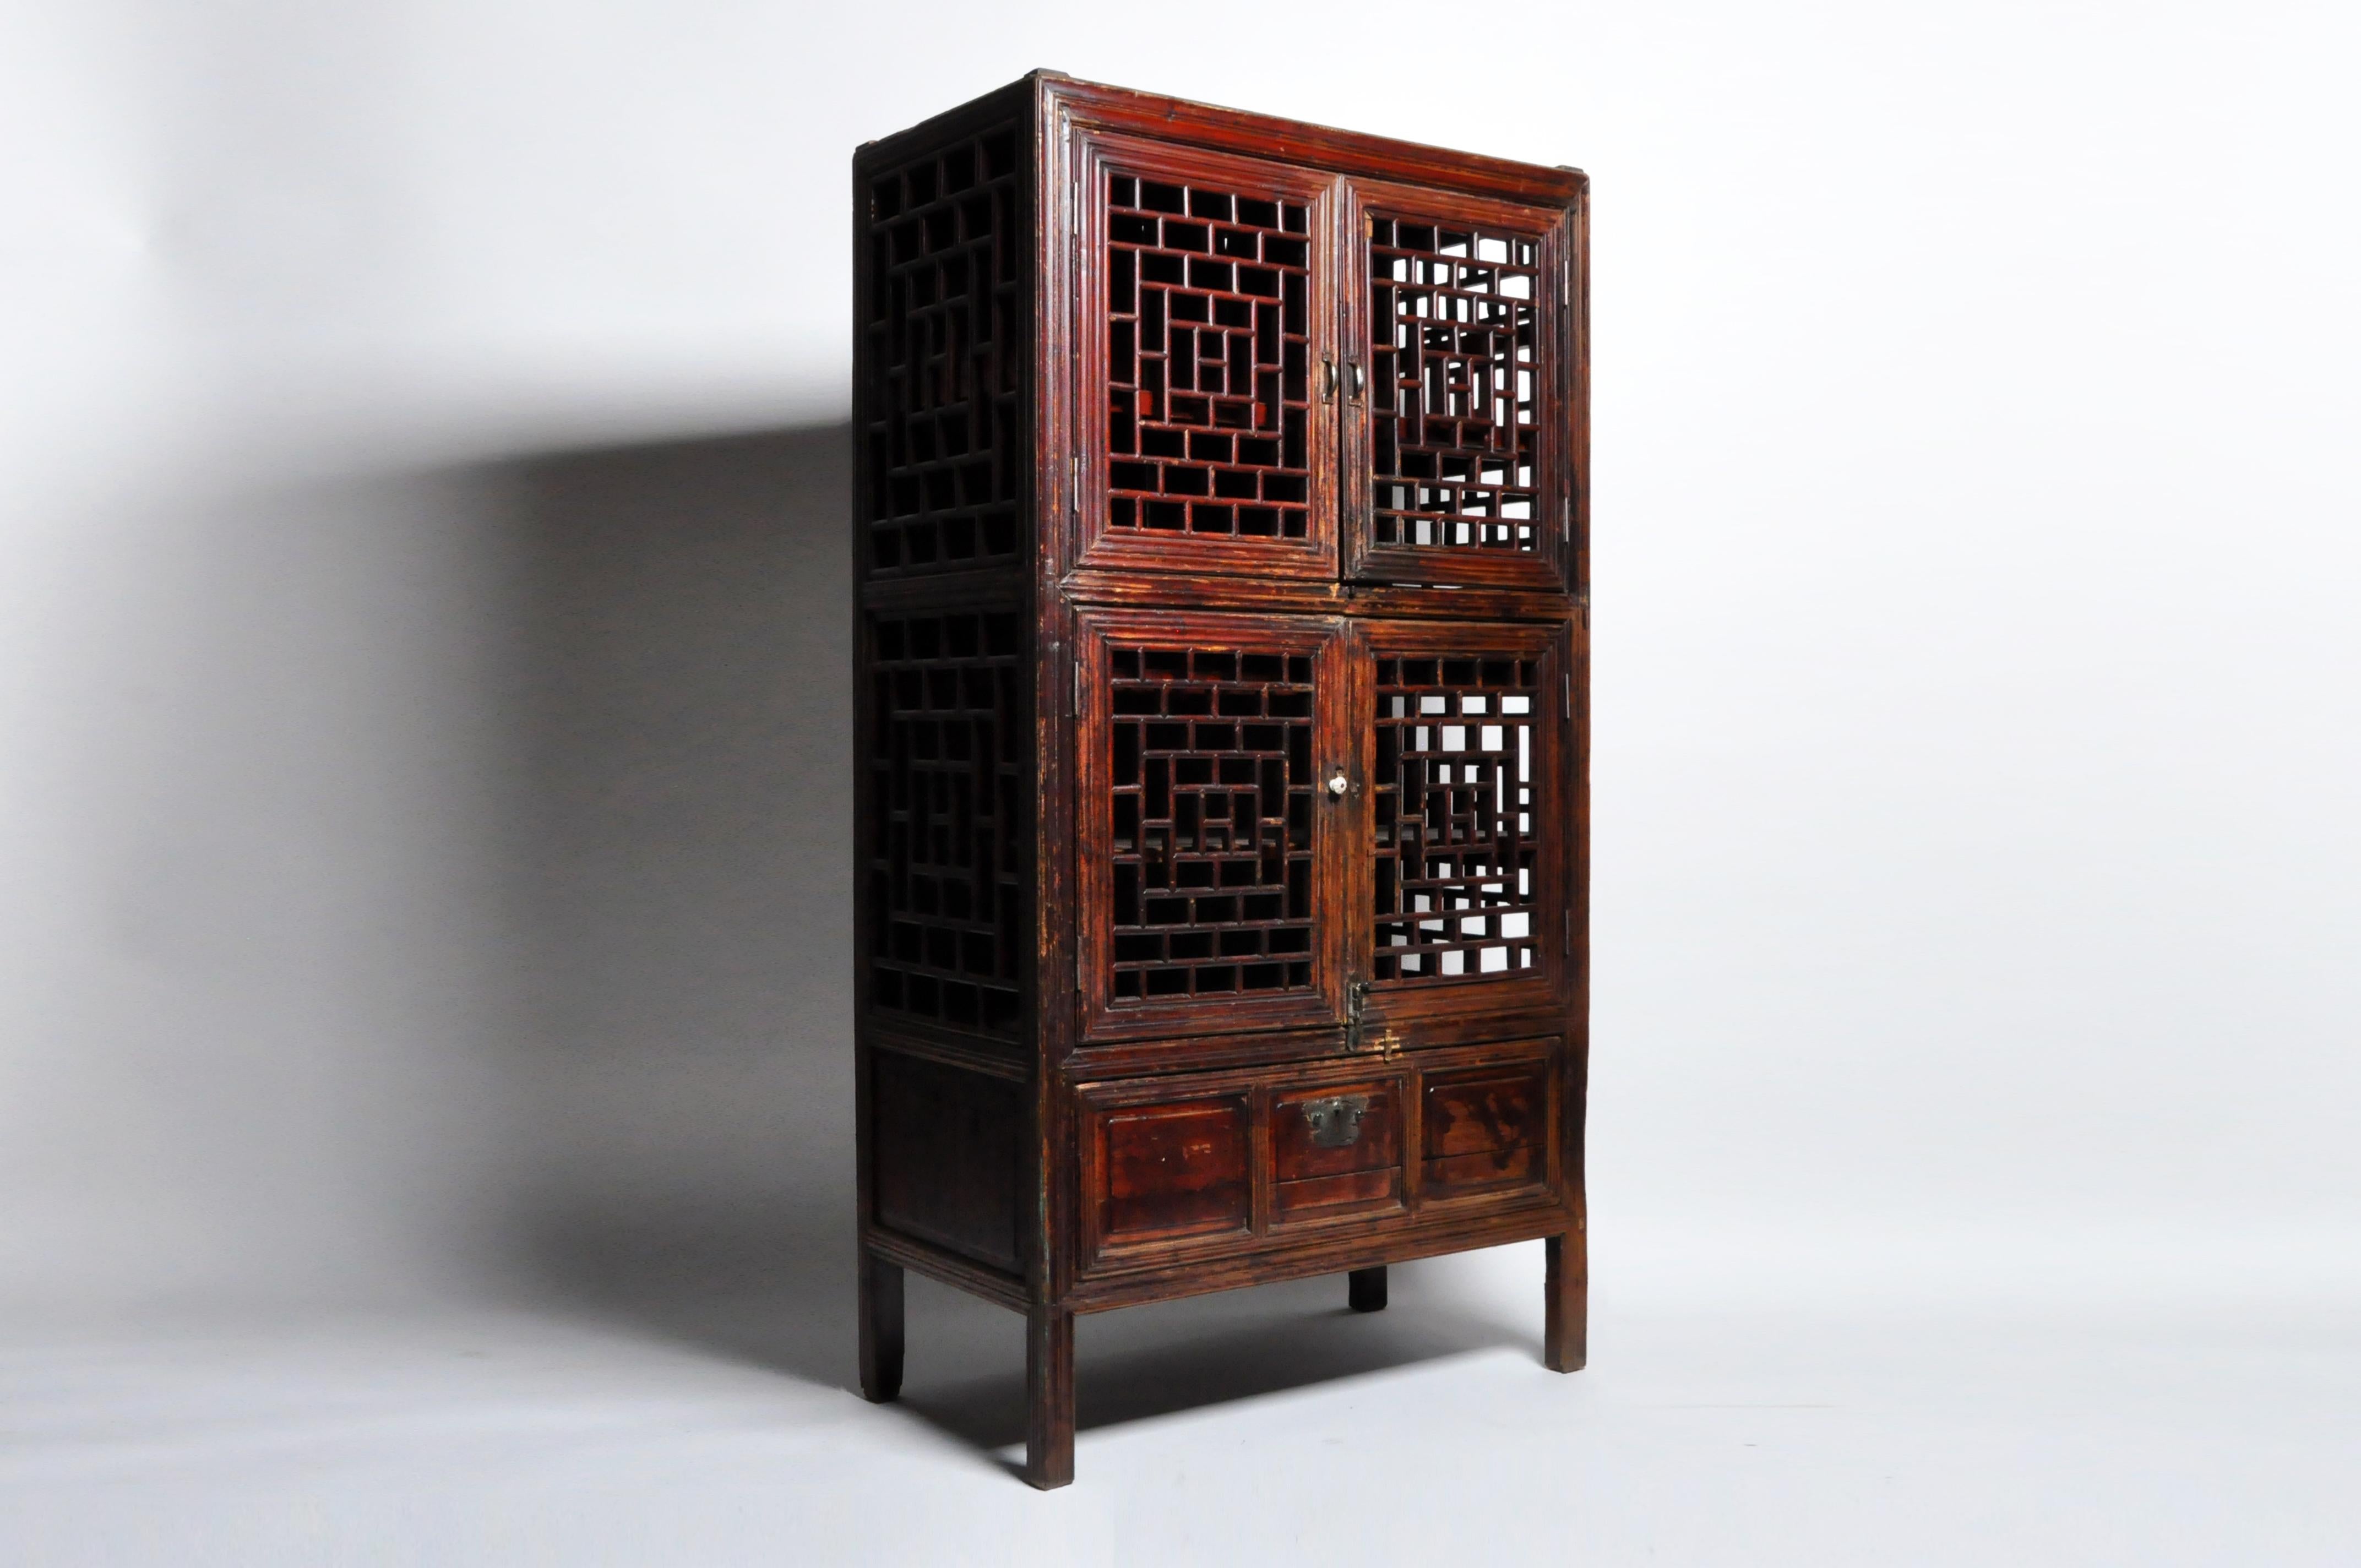 Chinese furniture is known for its practicality, beauty, and sturdy construction. This storage cabinet features lattice doors and an oxblood lacquer finish that has aged to a beautiful patina. Though this is a “softwood” piece; made from Fir, it has